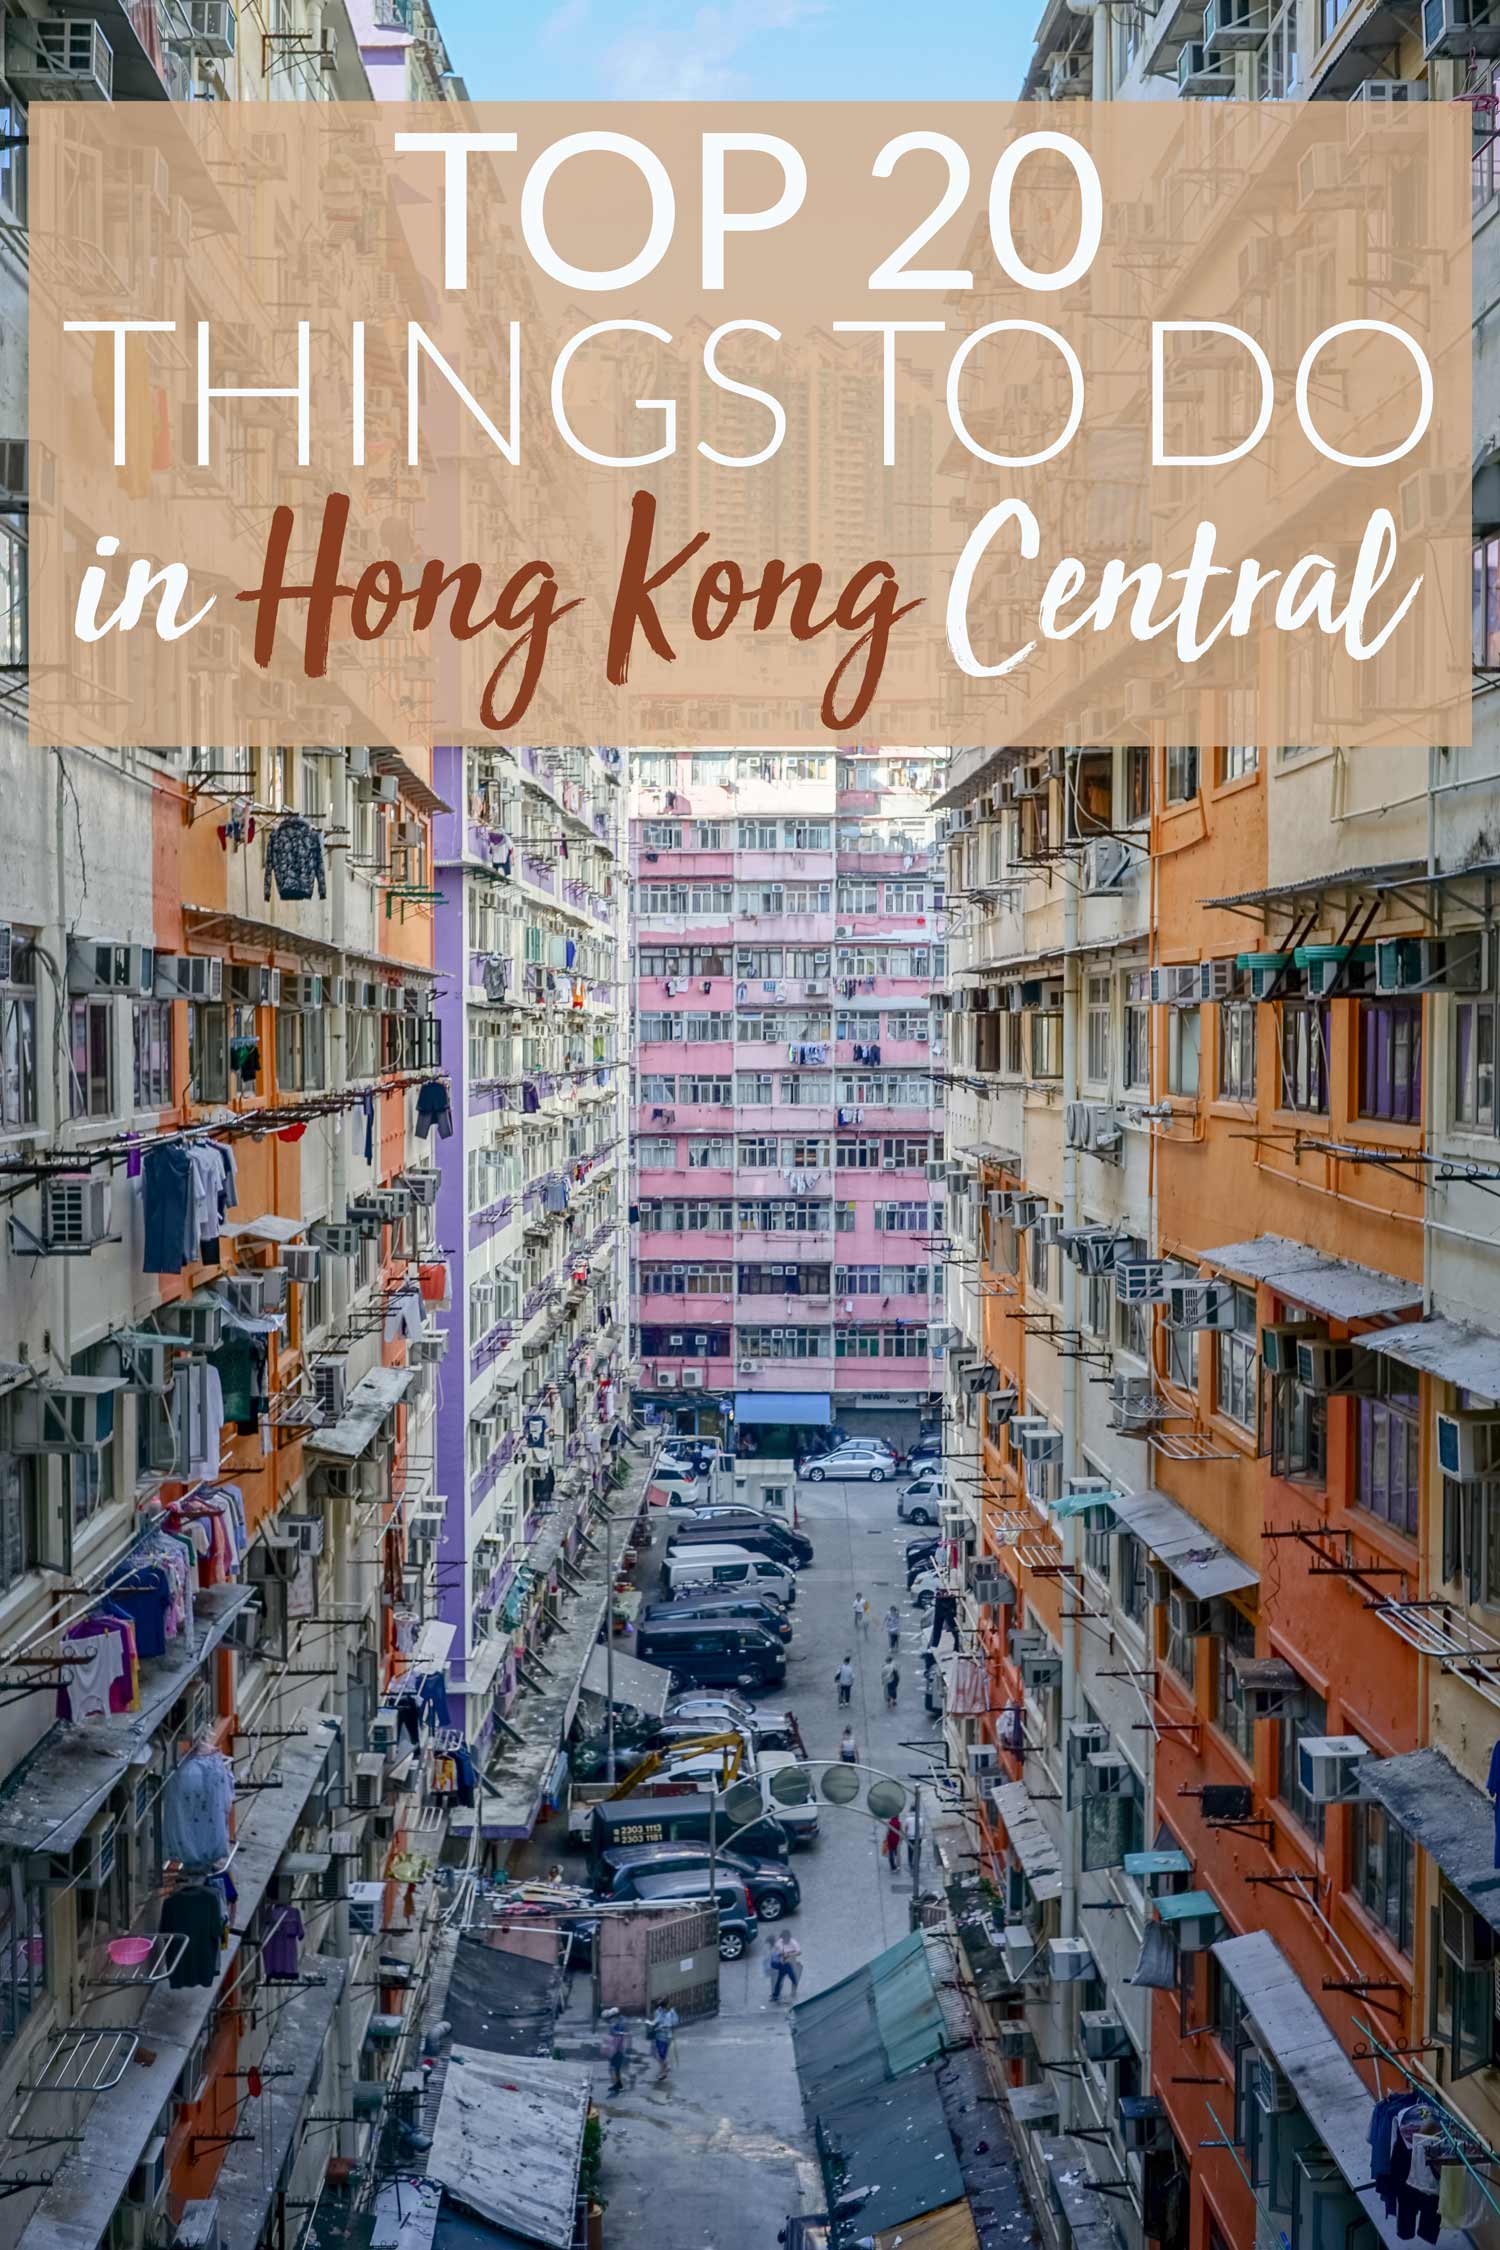 Top 20 Things to do in Hong Kong Central